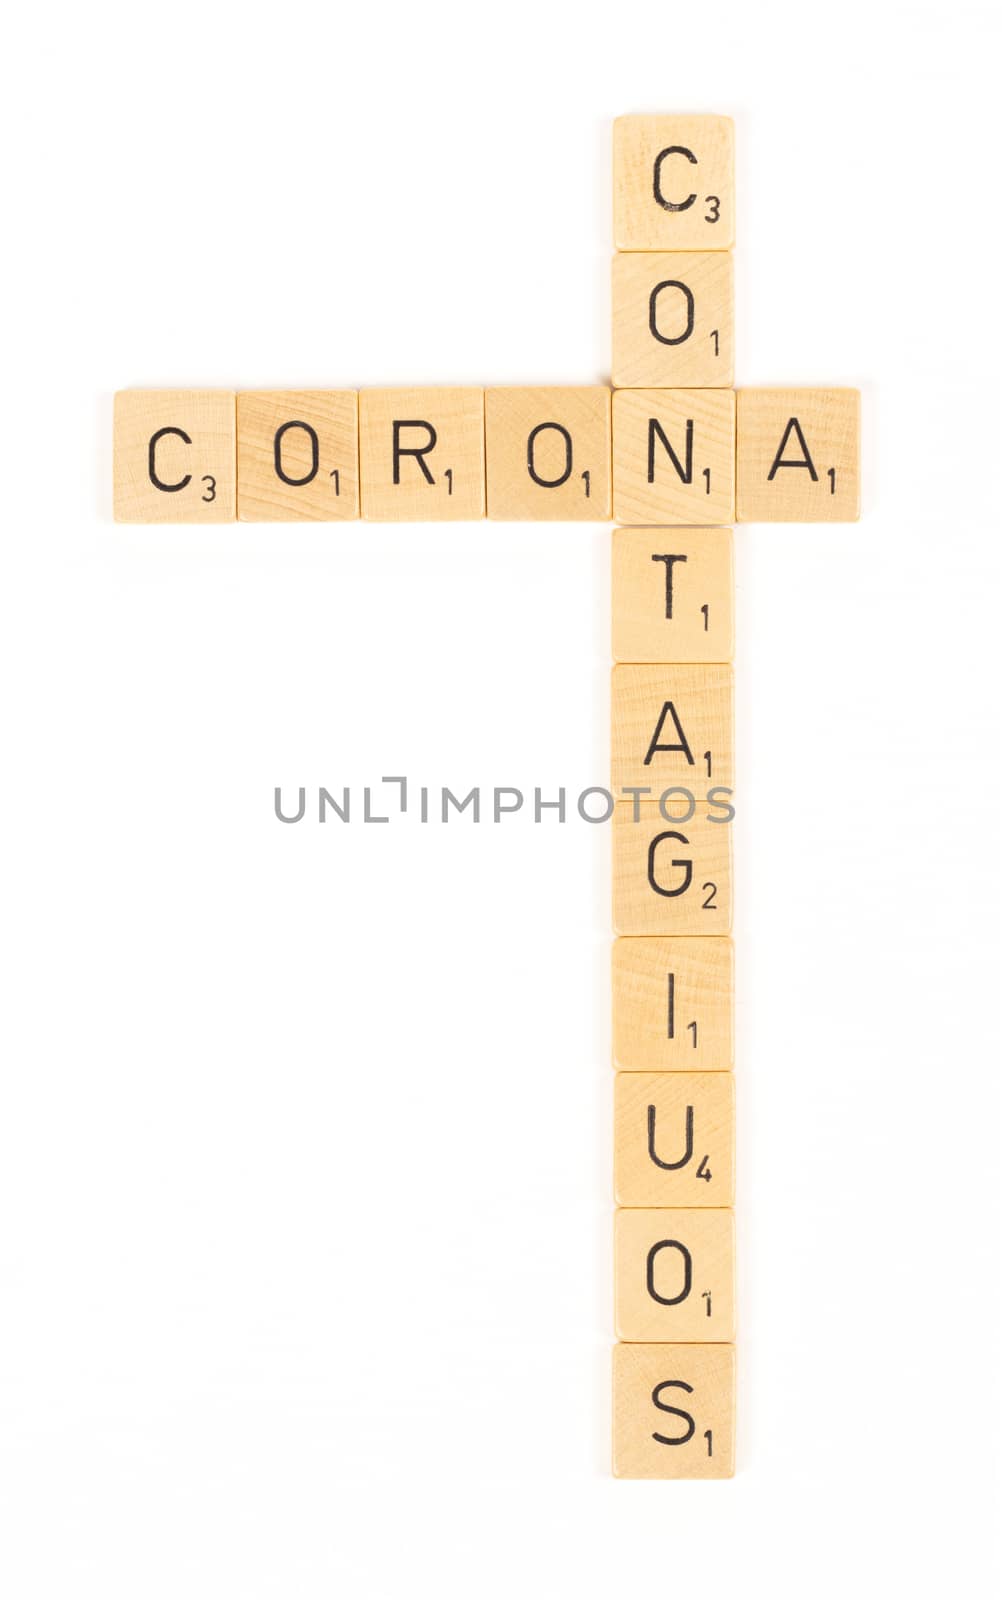 Corona contagious scrable letters, isolated on a white background